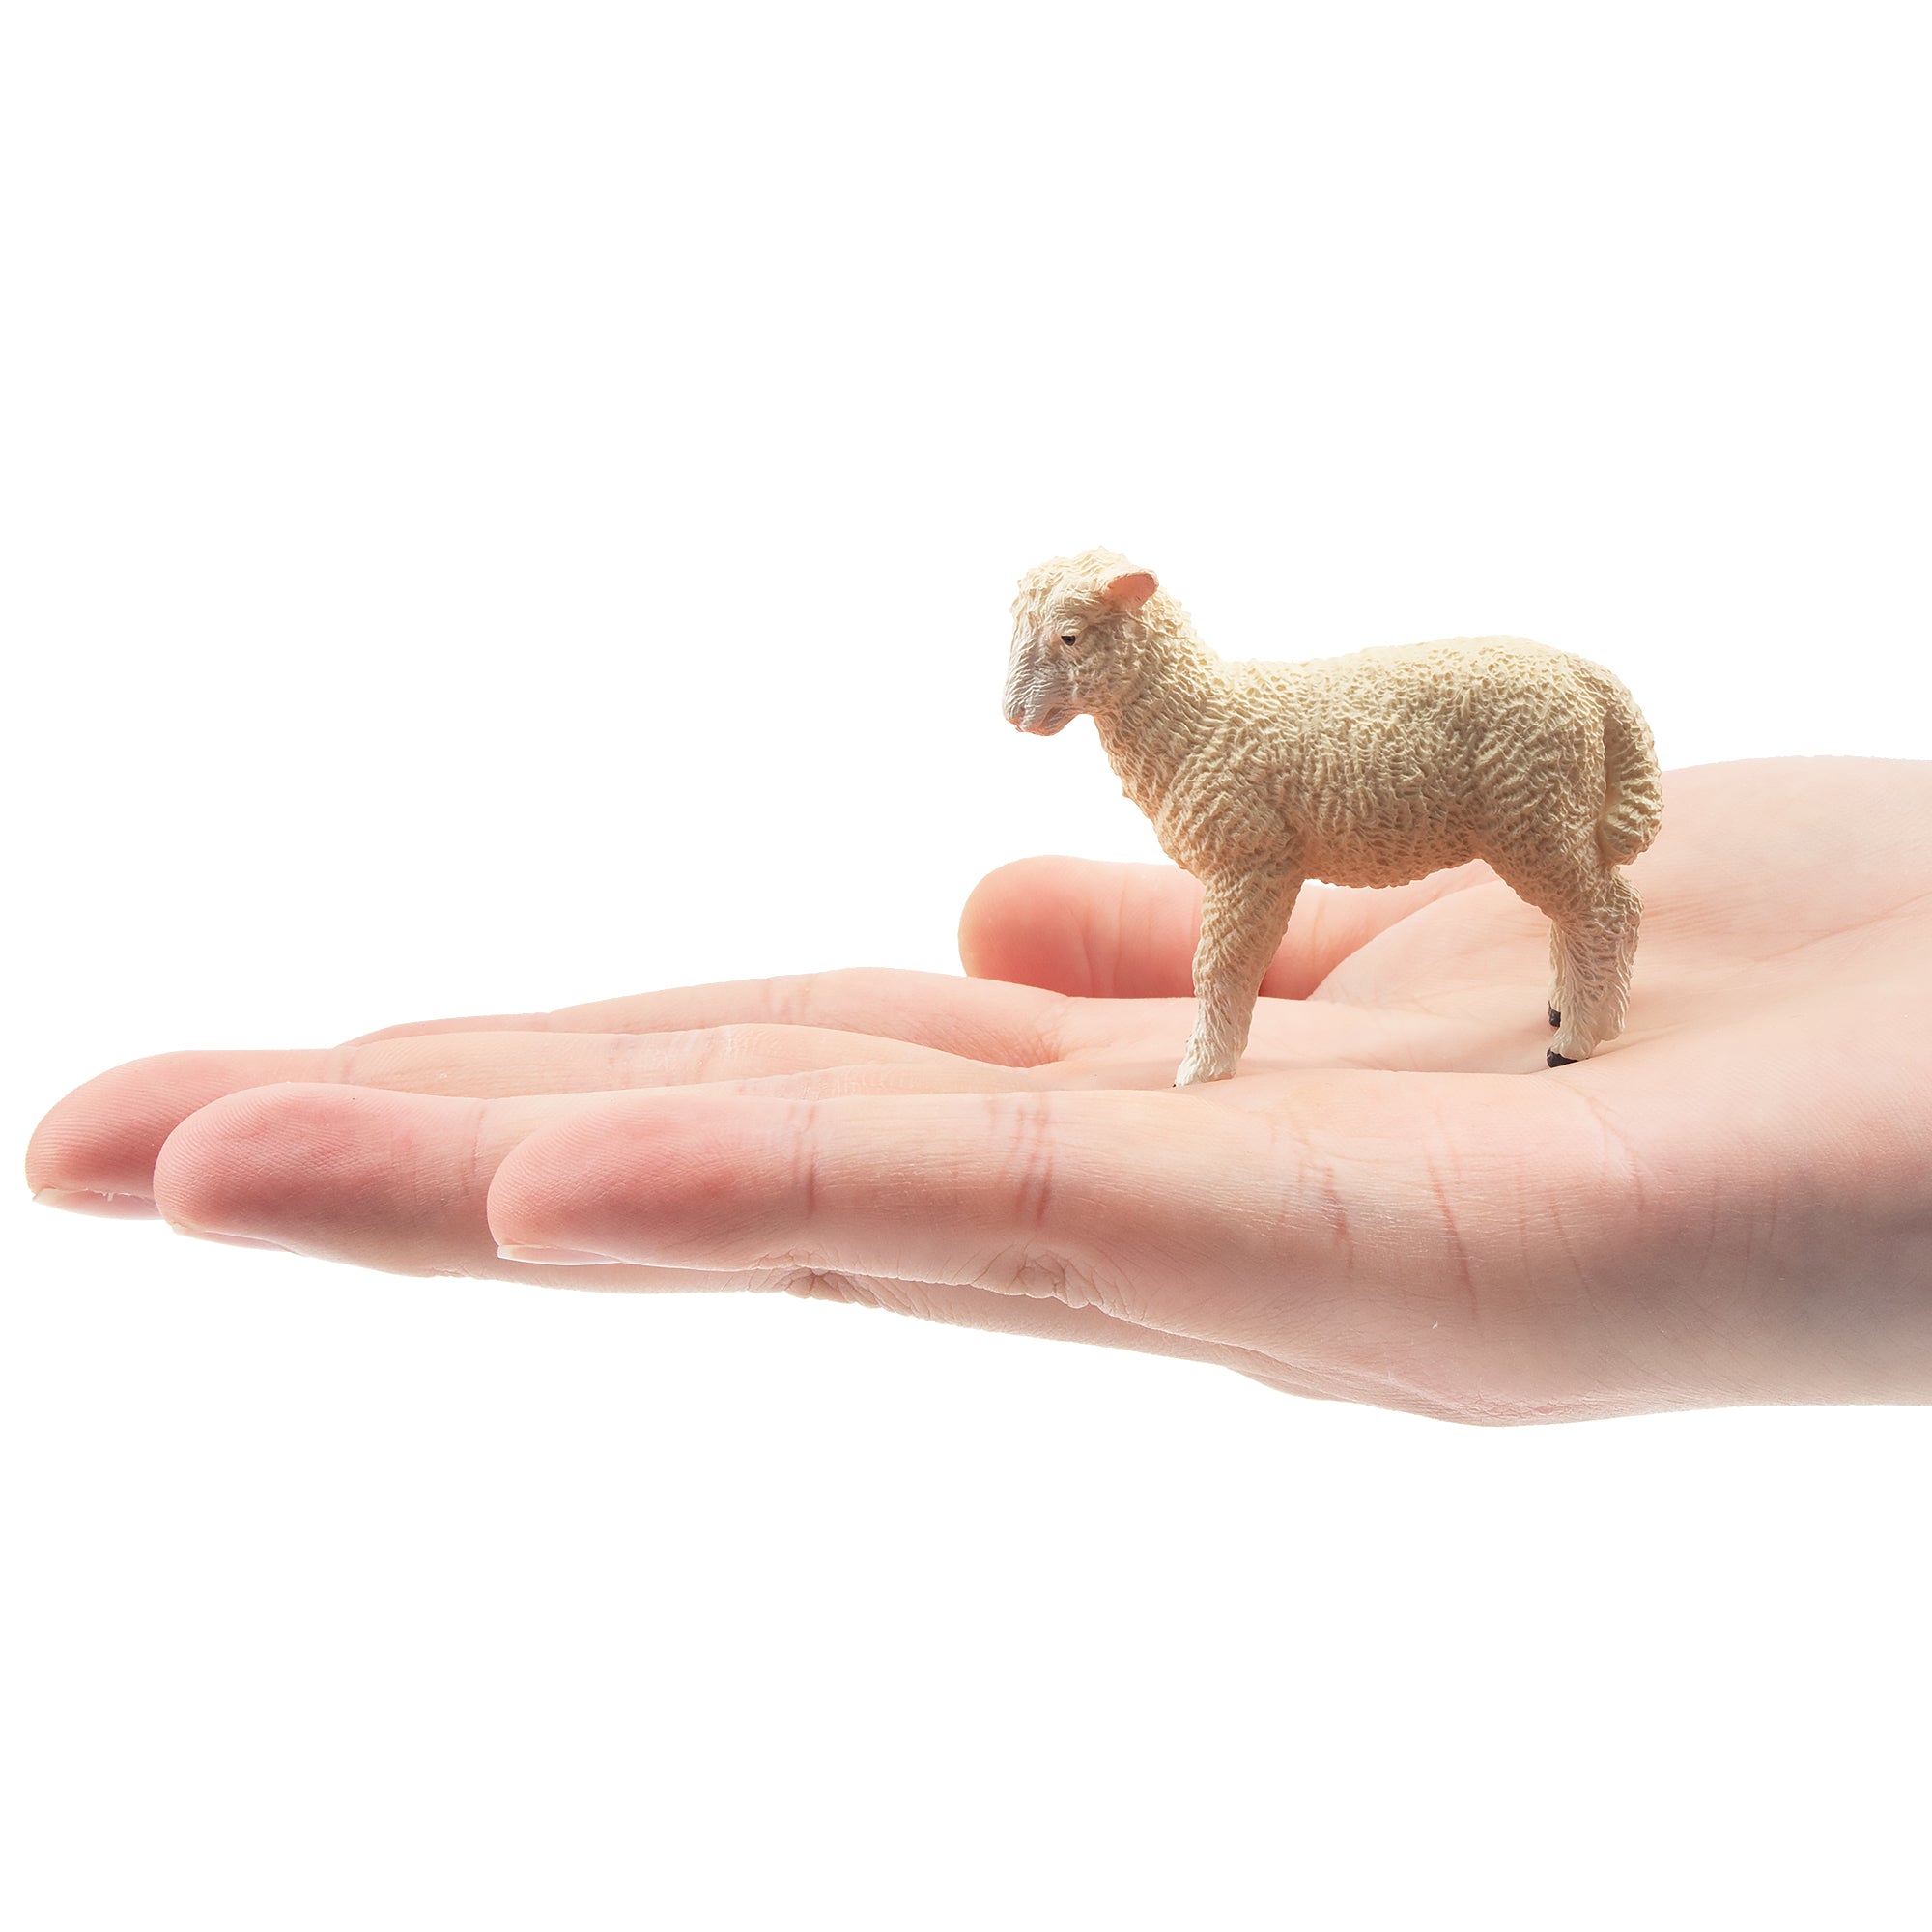 Toymany Ambling Light-Haired Lamb Figurine Toy-on hand